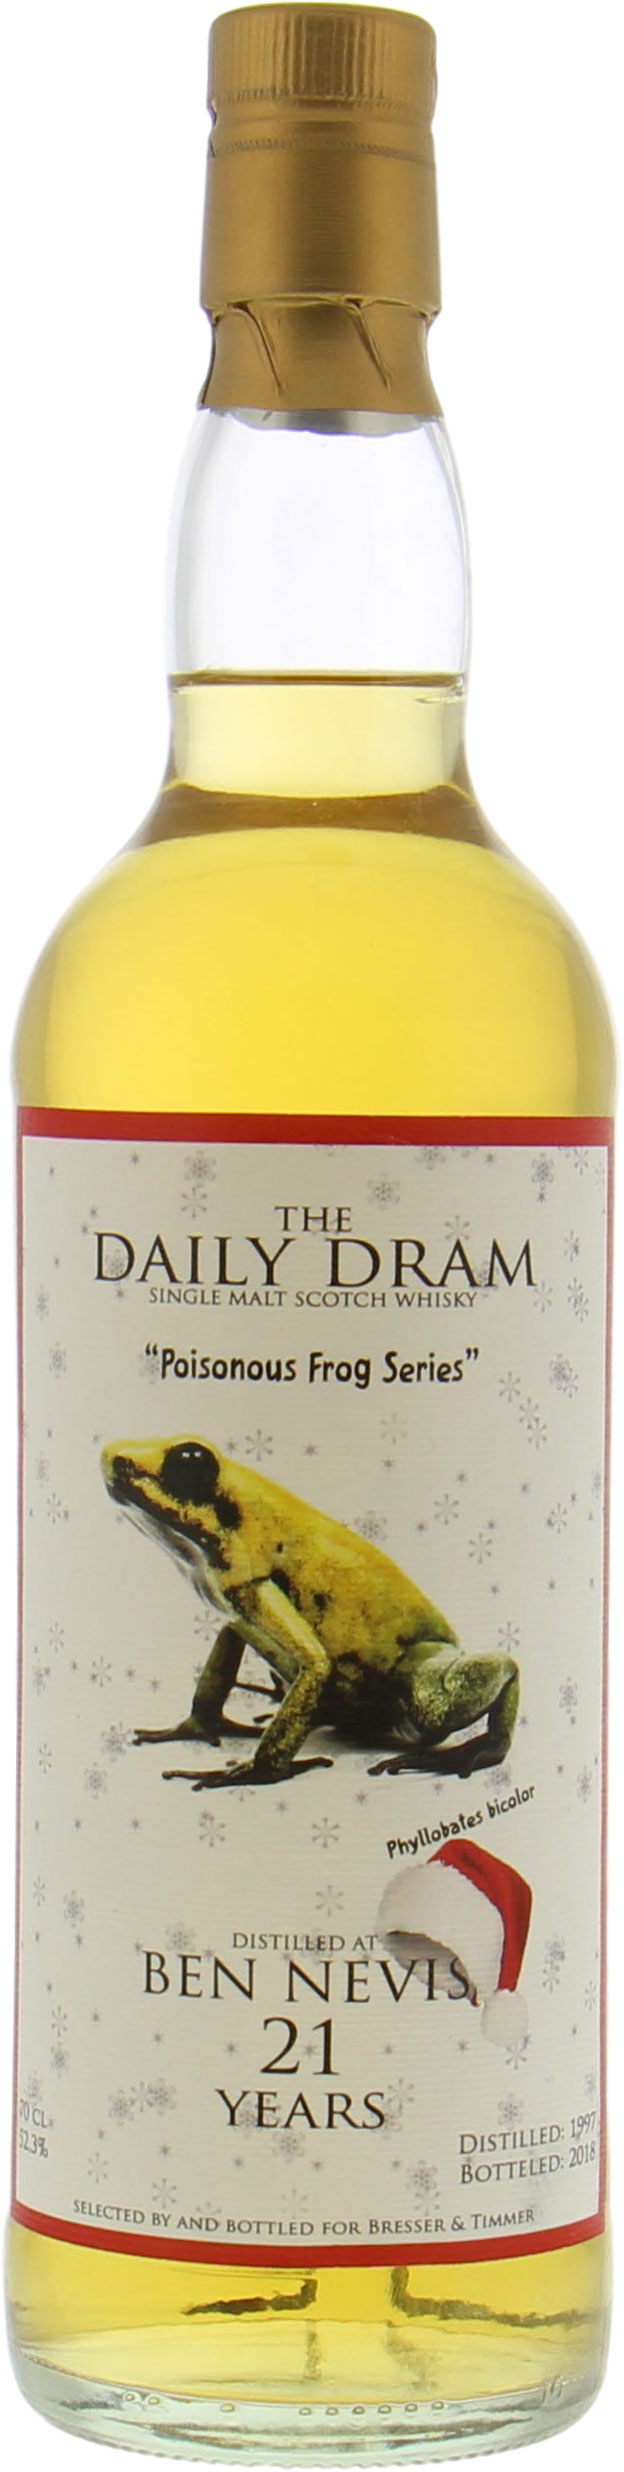 Ben Nevis - Daily Dram 21 Years Old Poisonous Frog Christmas Edition 52.3% 1997